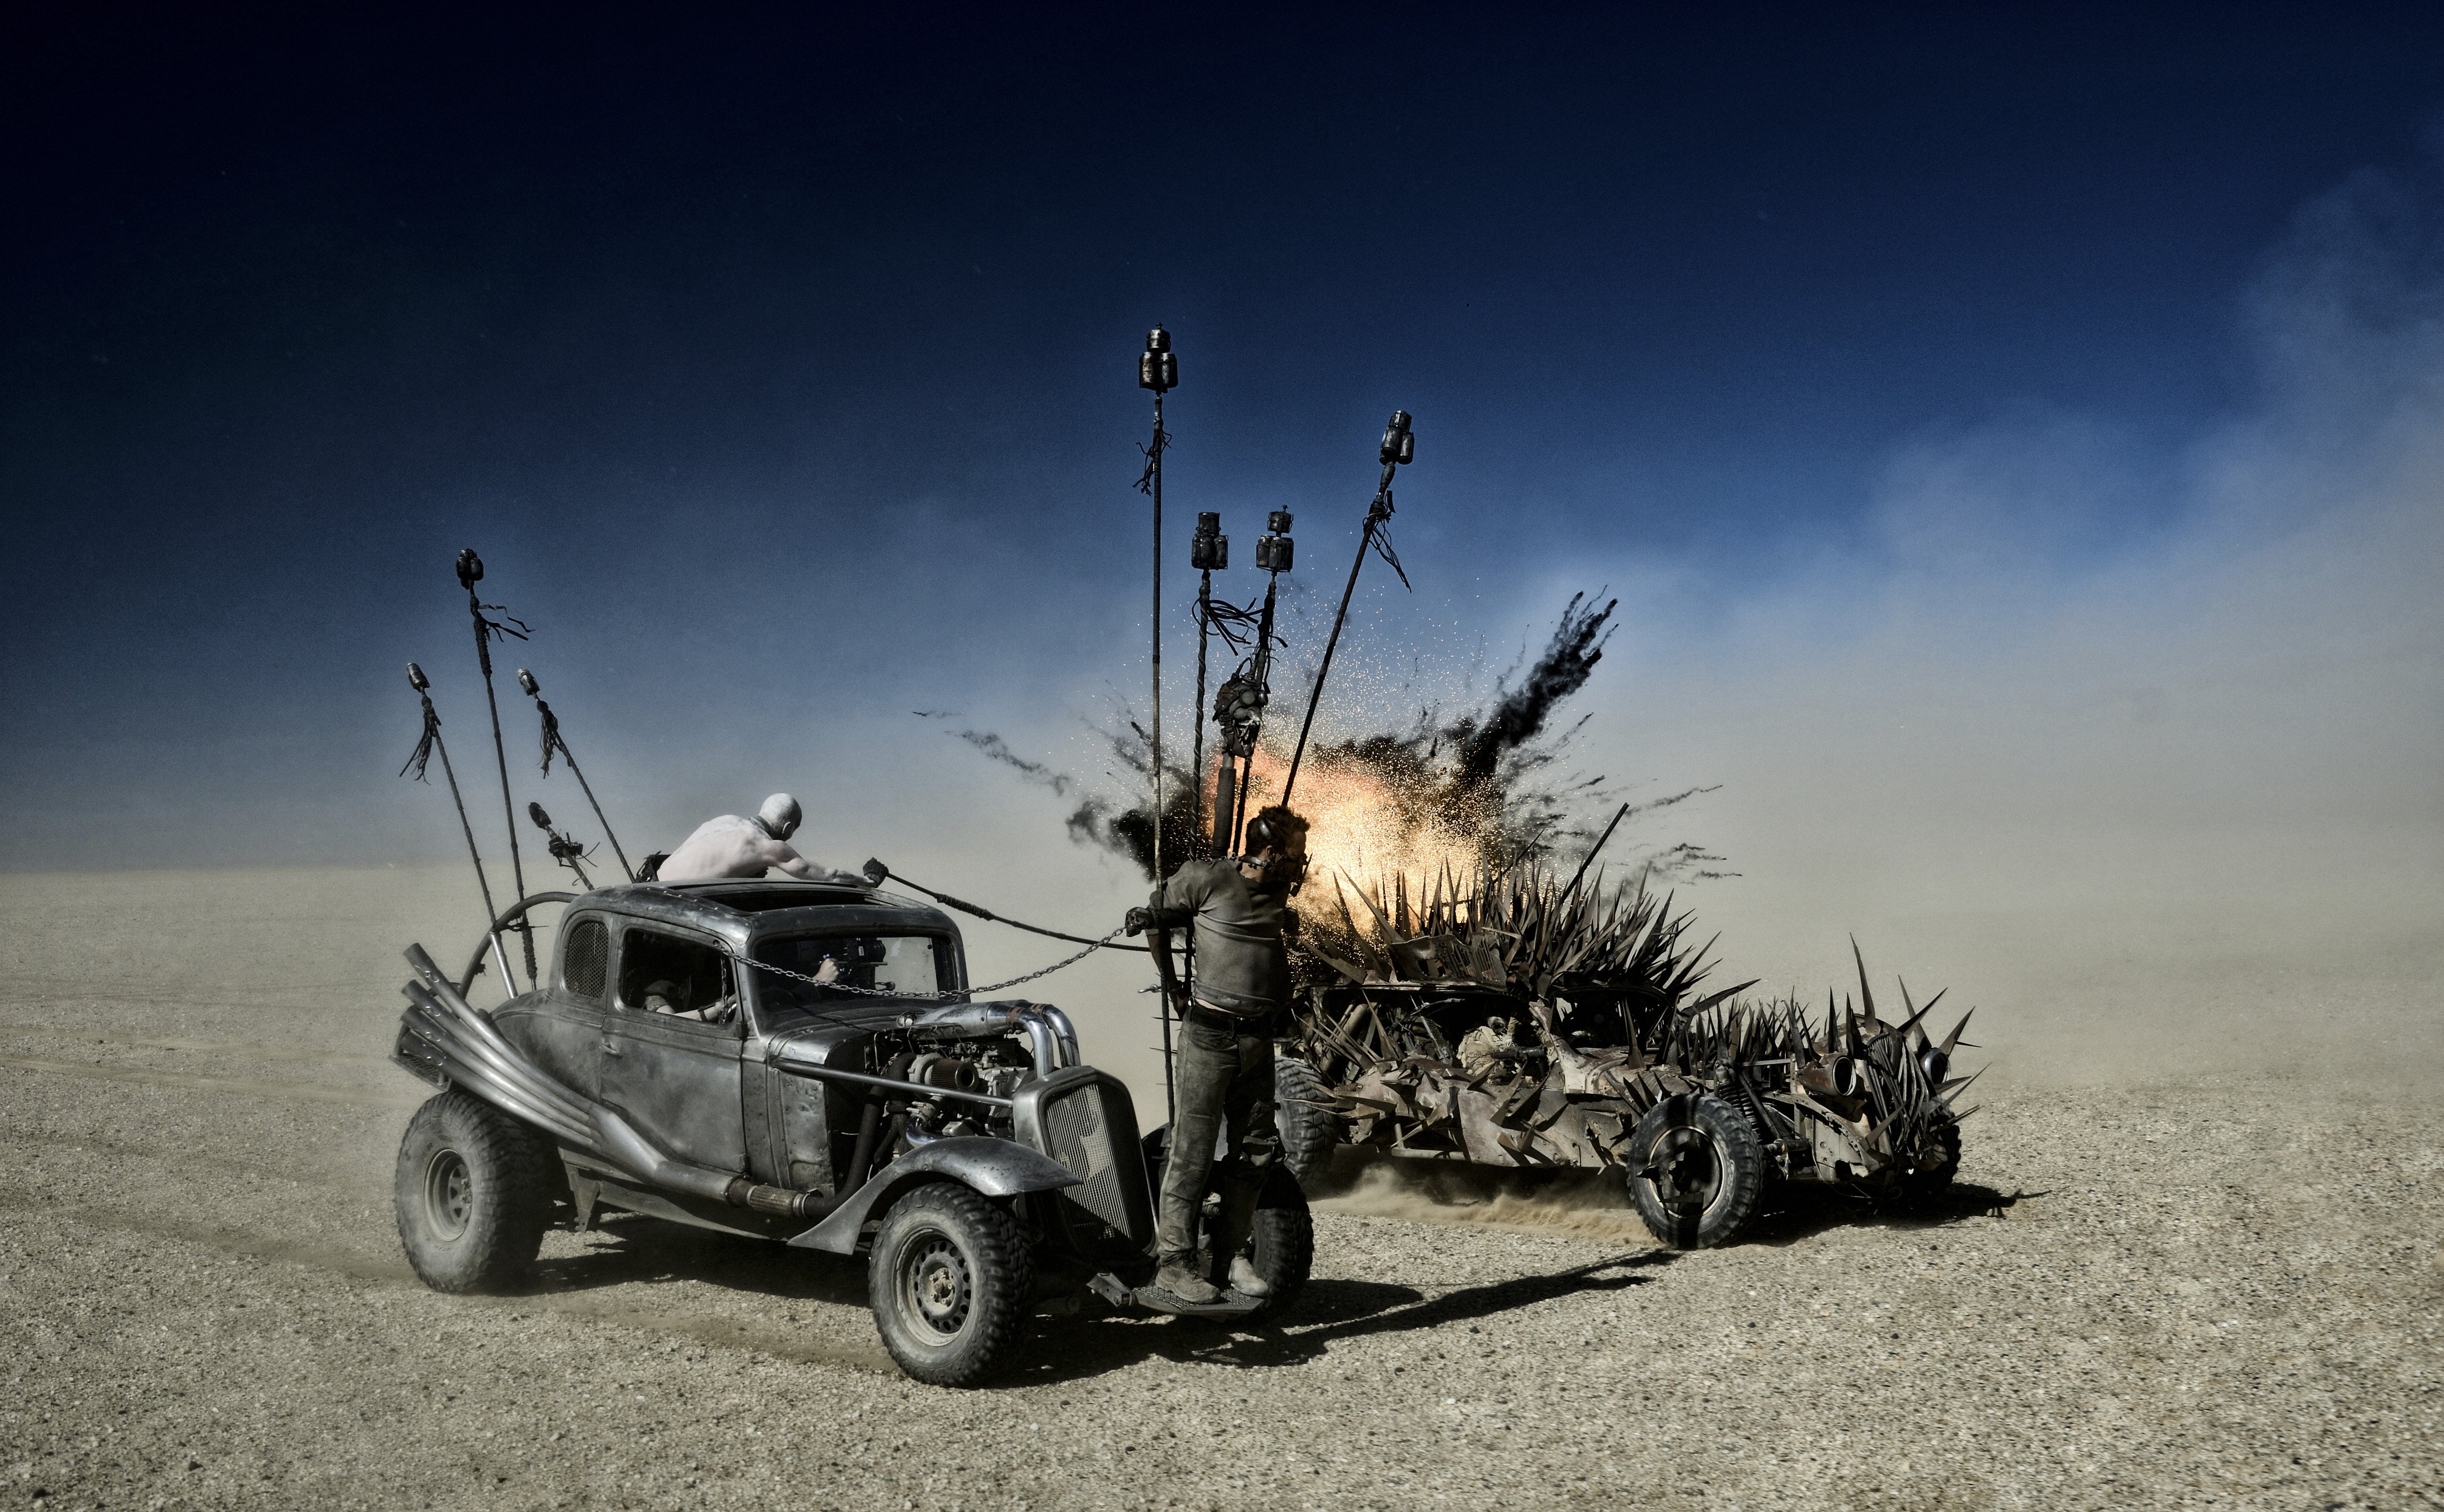  action fighting adventure 1mad max apocalyptic road warrior wallpaper